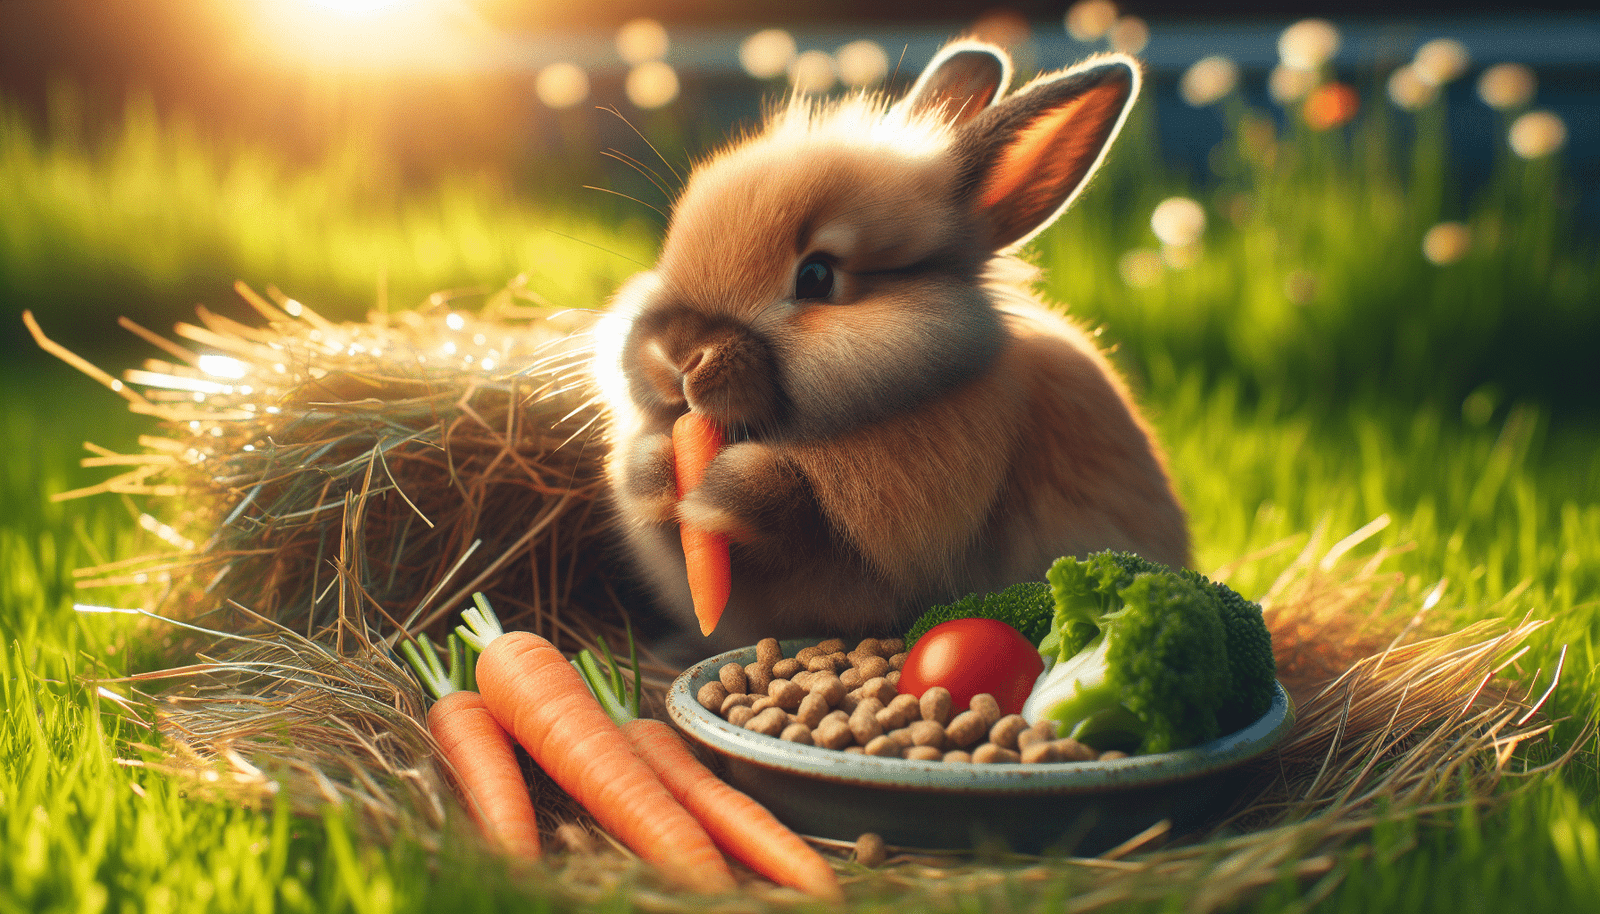 Rabbit enjoying a balanced meal with hay and vegetables